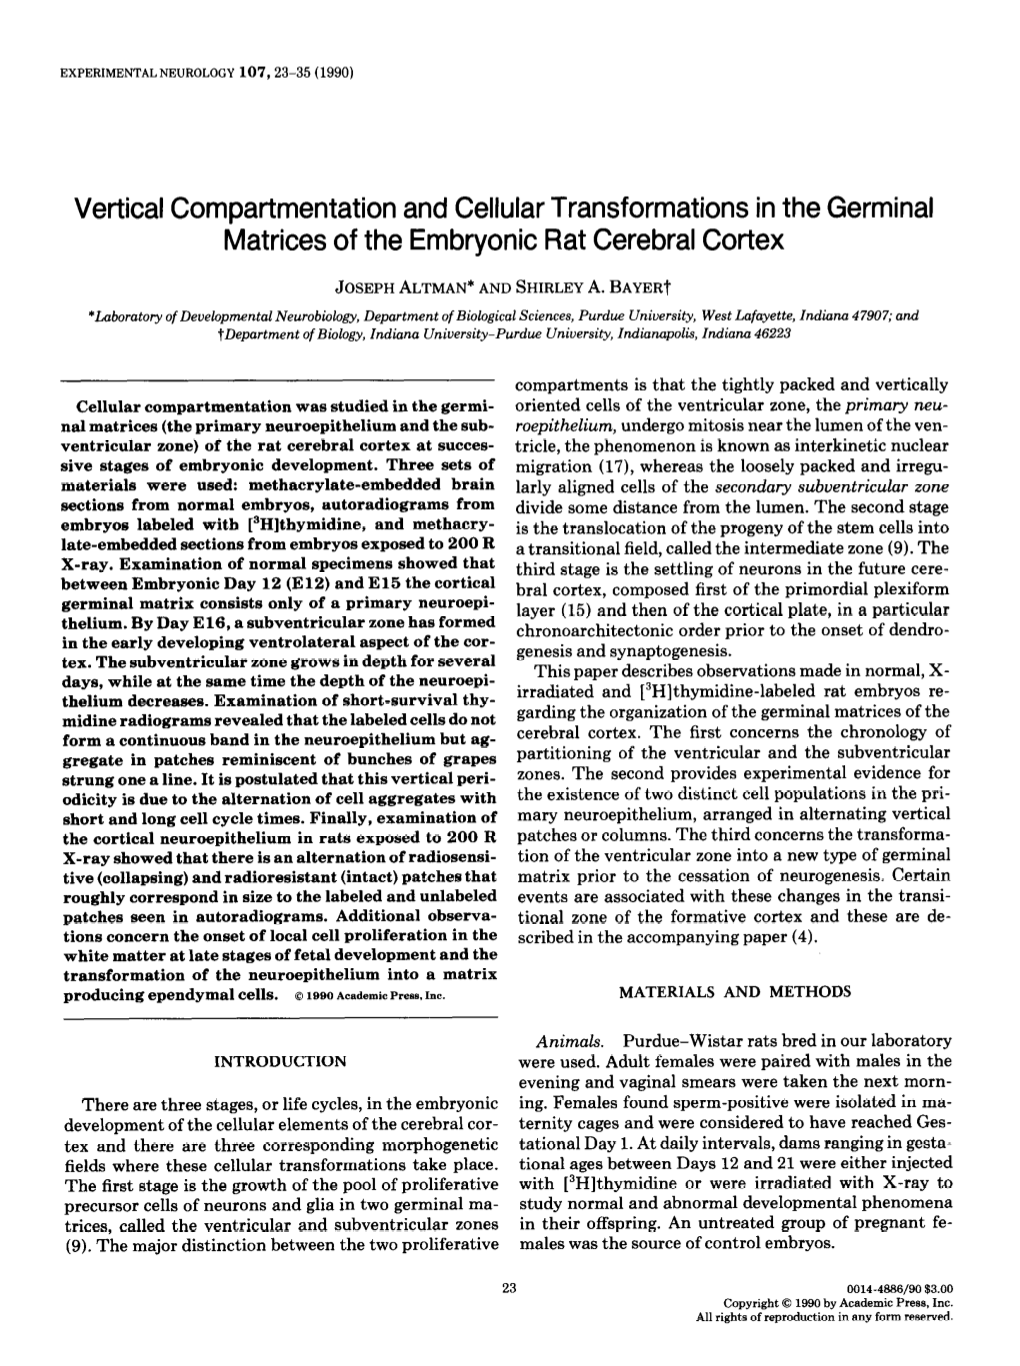 Vertical Compartmentation and Cellular Transformations in the Germinal Matrices of the Embryonic Rat Cerebral Cortex